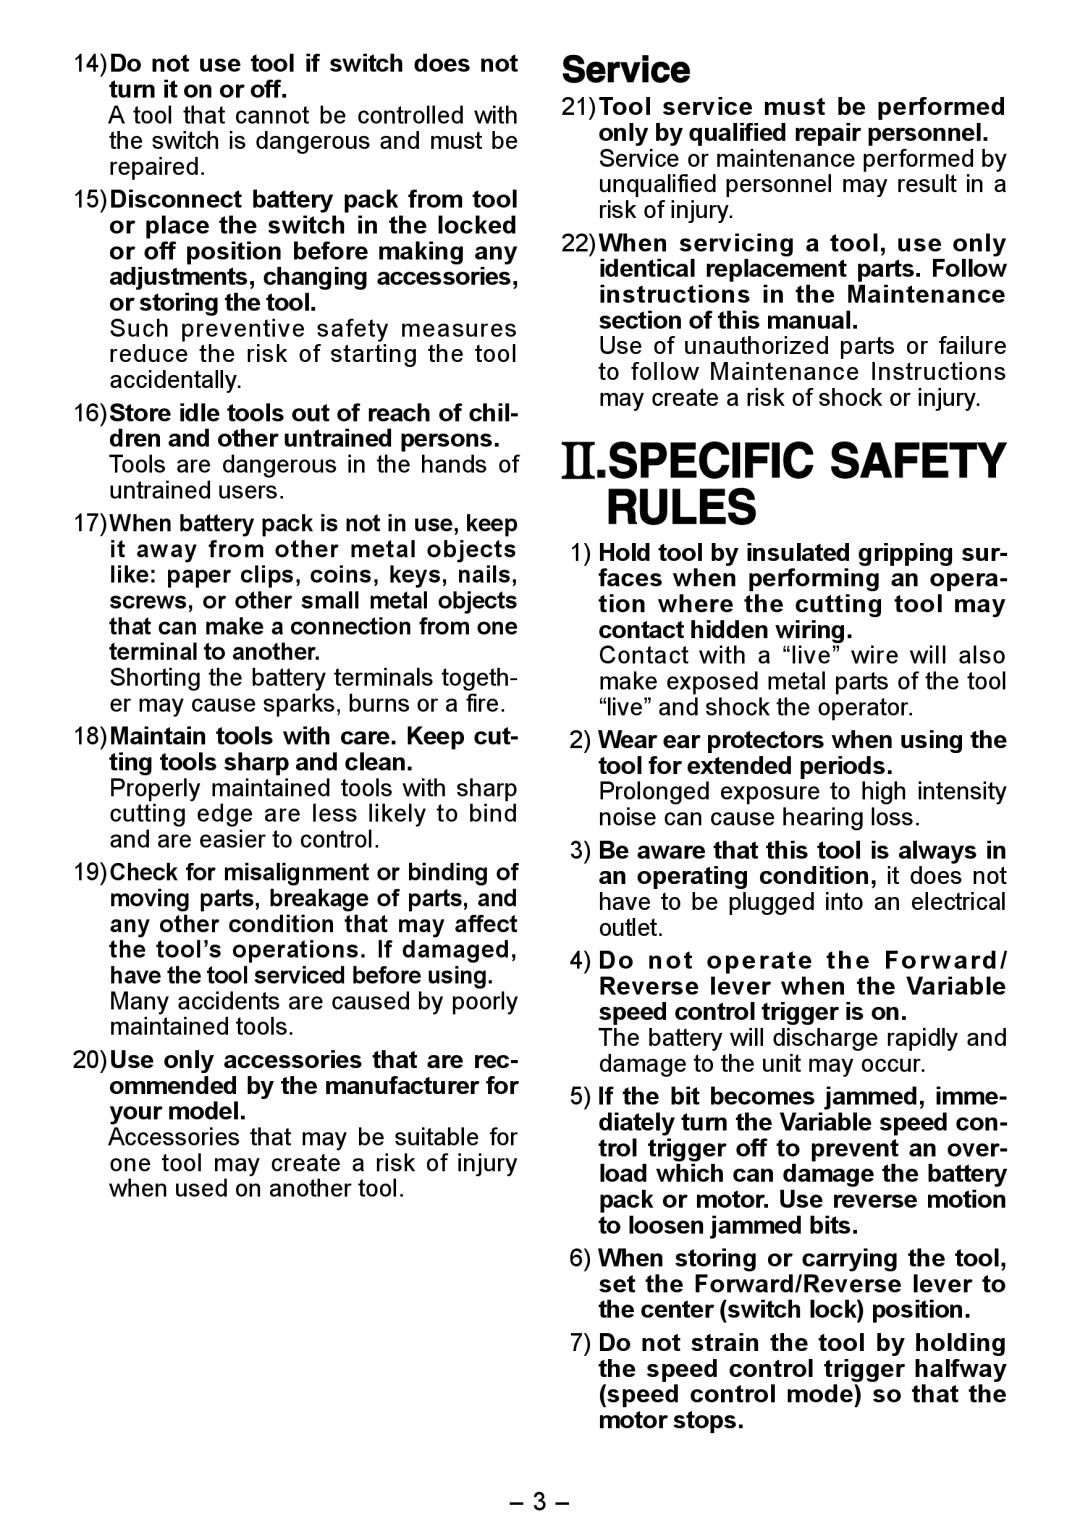 Panasonic EY6450 operating instructions Specific Safety Rules, Service 